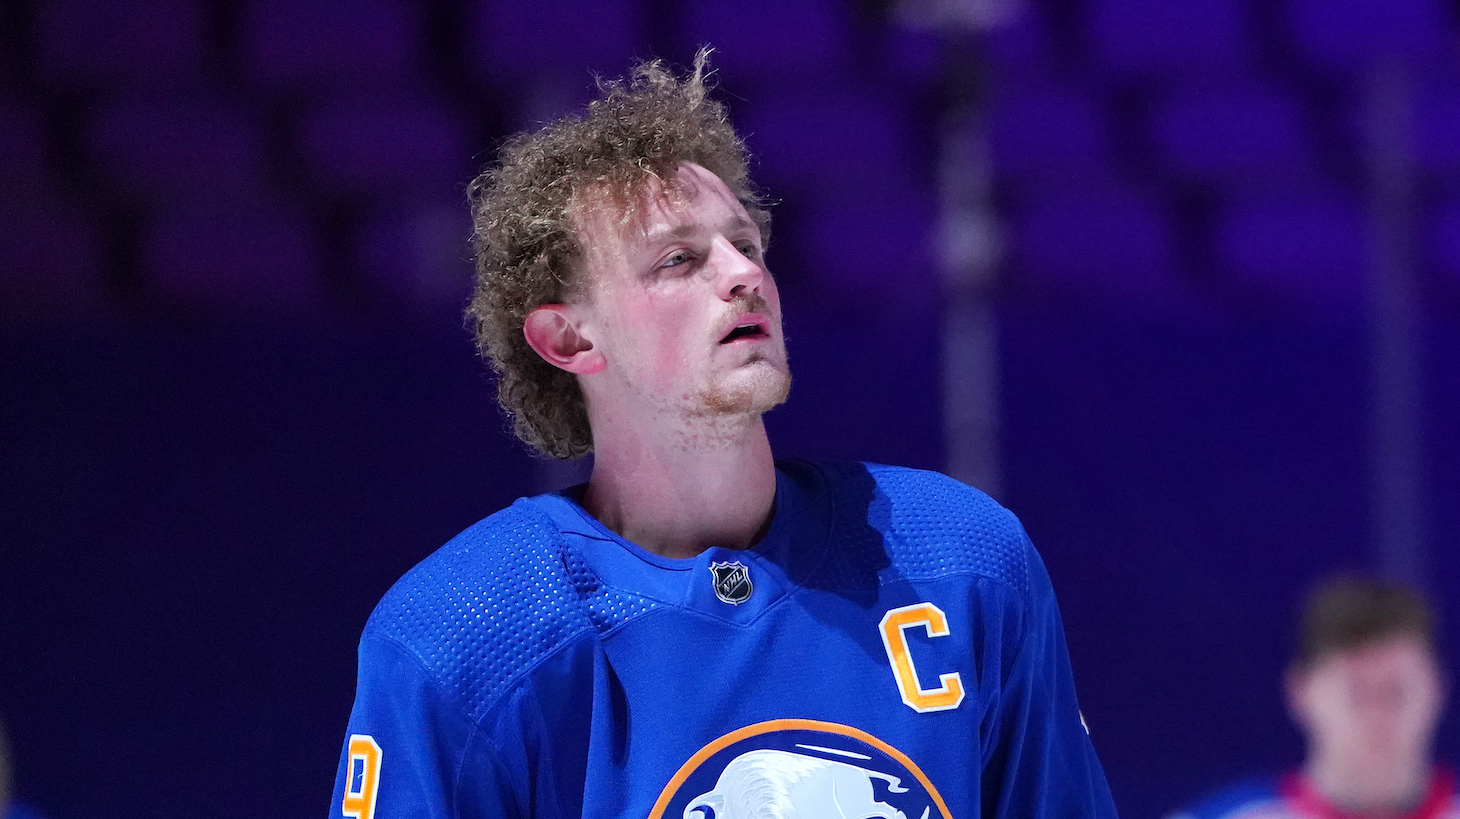 BUFFALO, NY - JANUARY 26: Jack Eichel #9 of the Buffalo Sabres before the game against the New York Rangers at KeyBank Center on January 26 , 2021 in Buffalo, New York. (Photo by Kevin Hoffman/Getty Images)